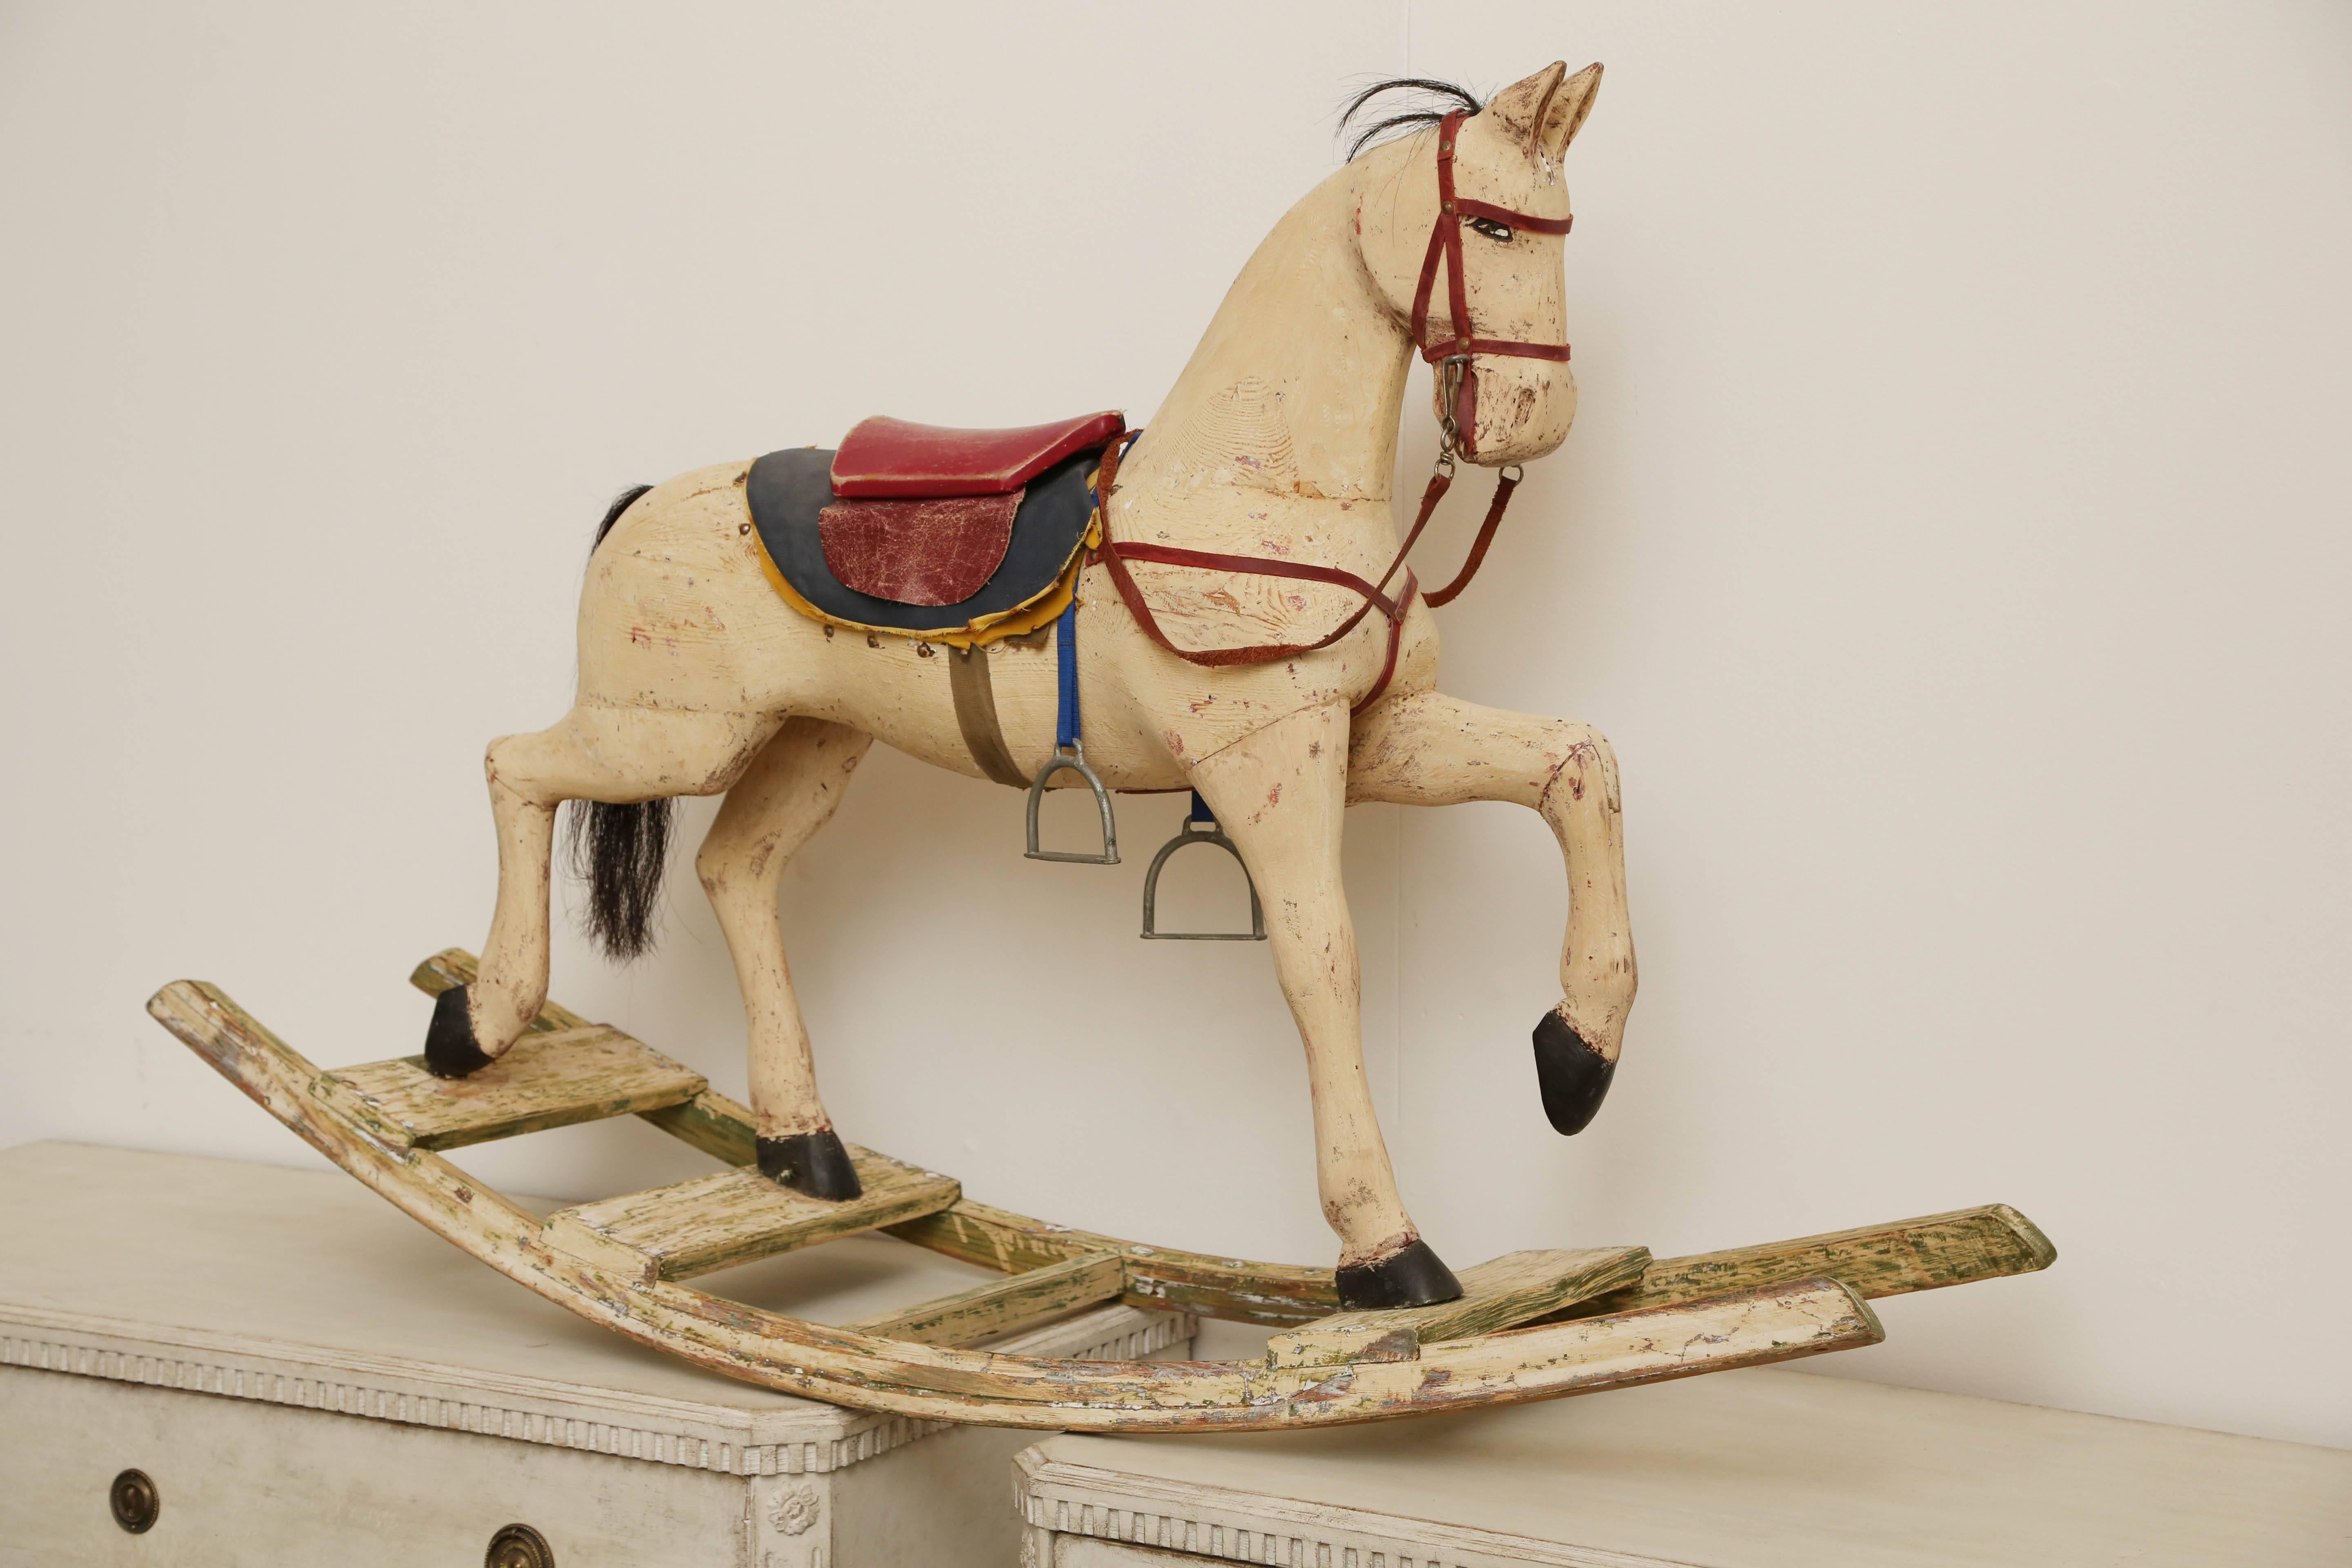 This antique Swedish rocking horse from the south of Sweden comes complete with saddle, reigns and metal horse shoes and stirrups. The tail and mane are made of real horse hair. Sturdy construction. The paint has been stripped down to it's original